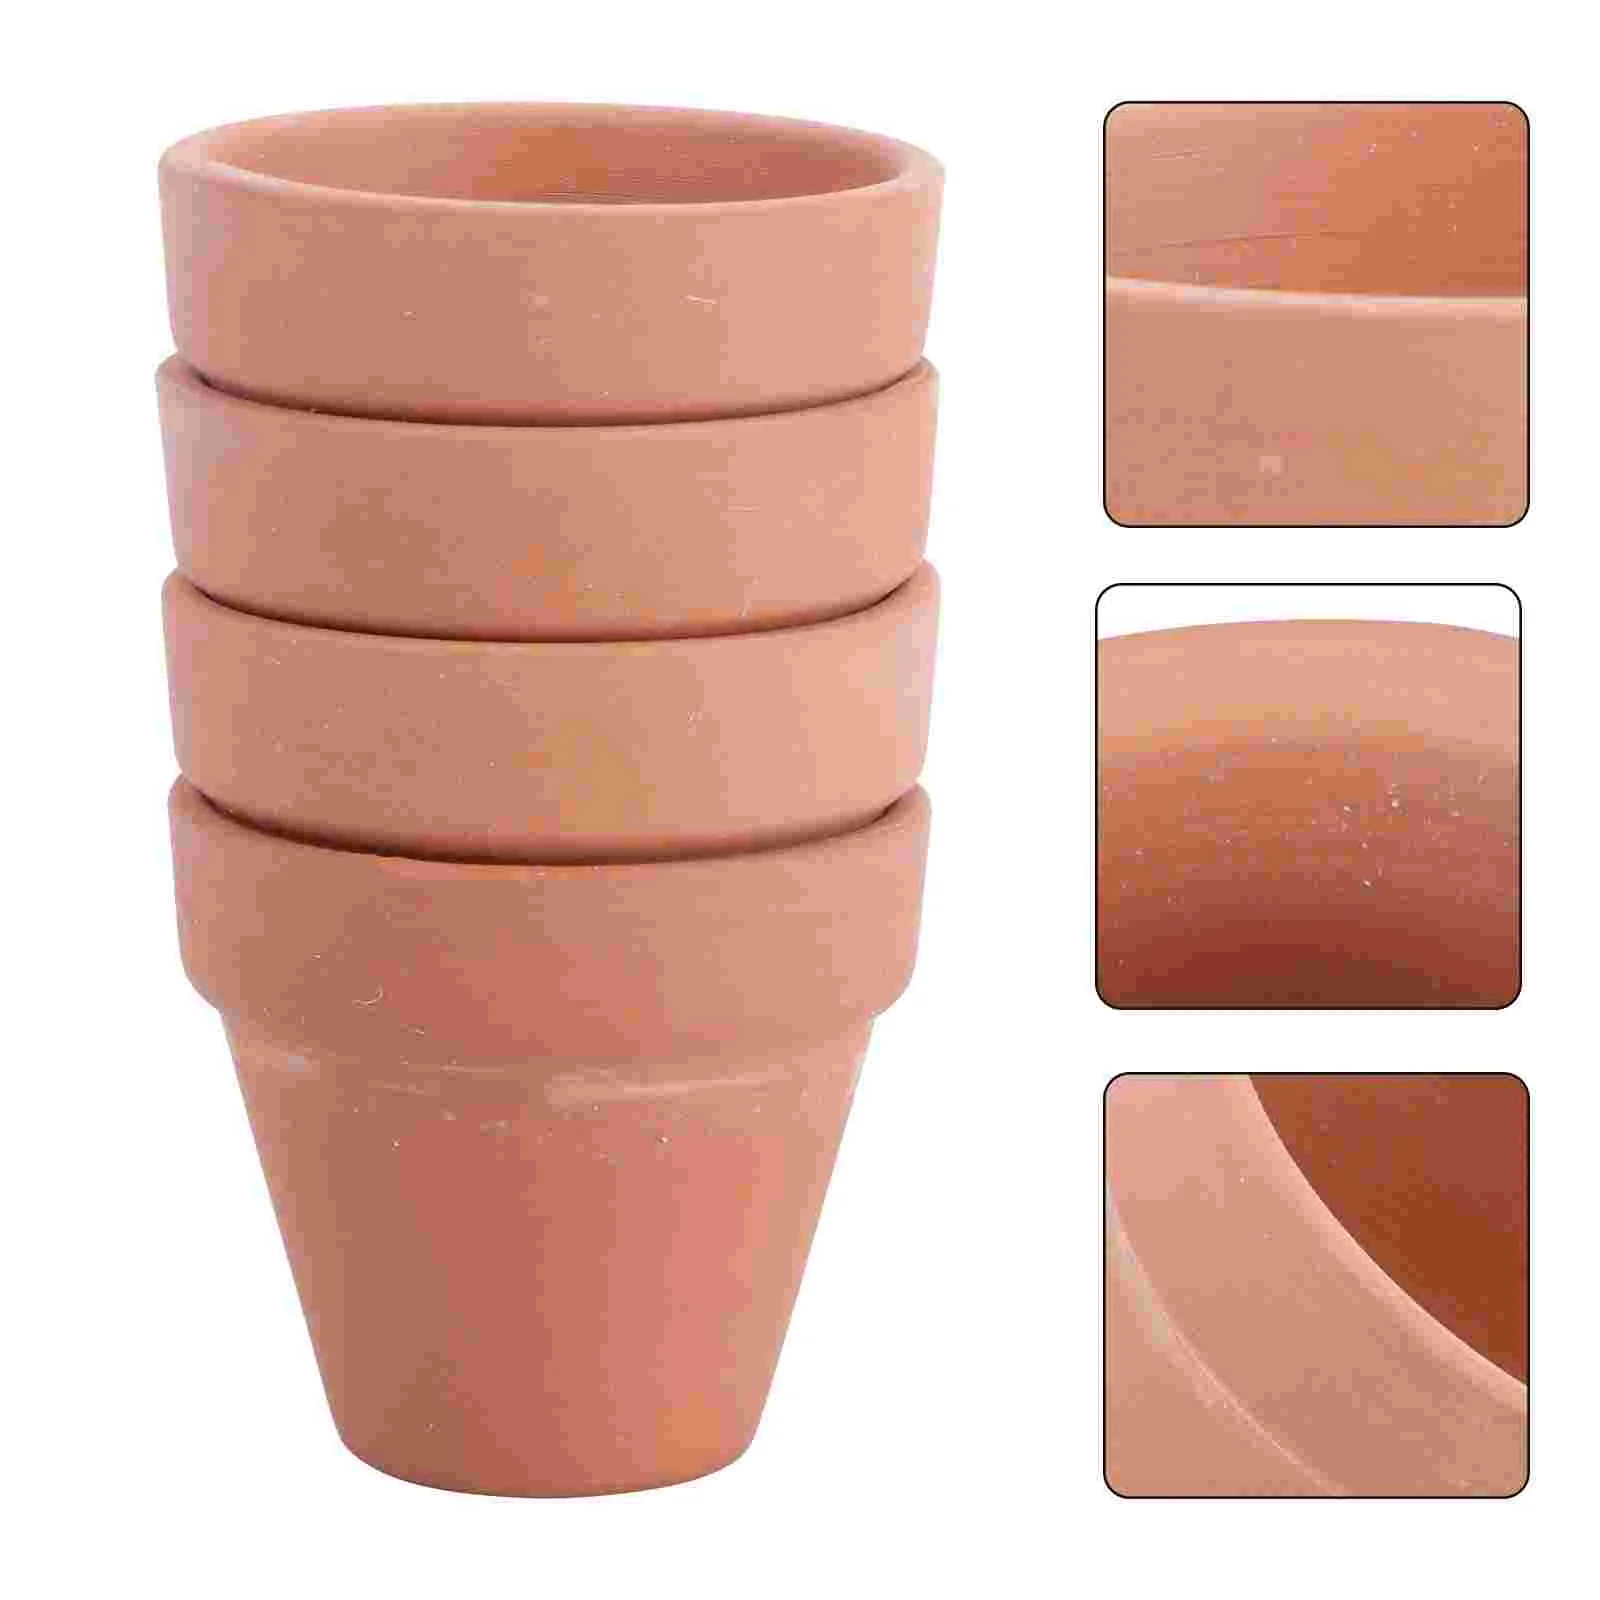 

Terracotta Pot Clay Pots Tiny Clay Planters Nursery Holder with Drainage Hole for Kids Adults Home Garden Planter Toolds